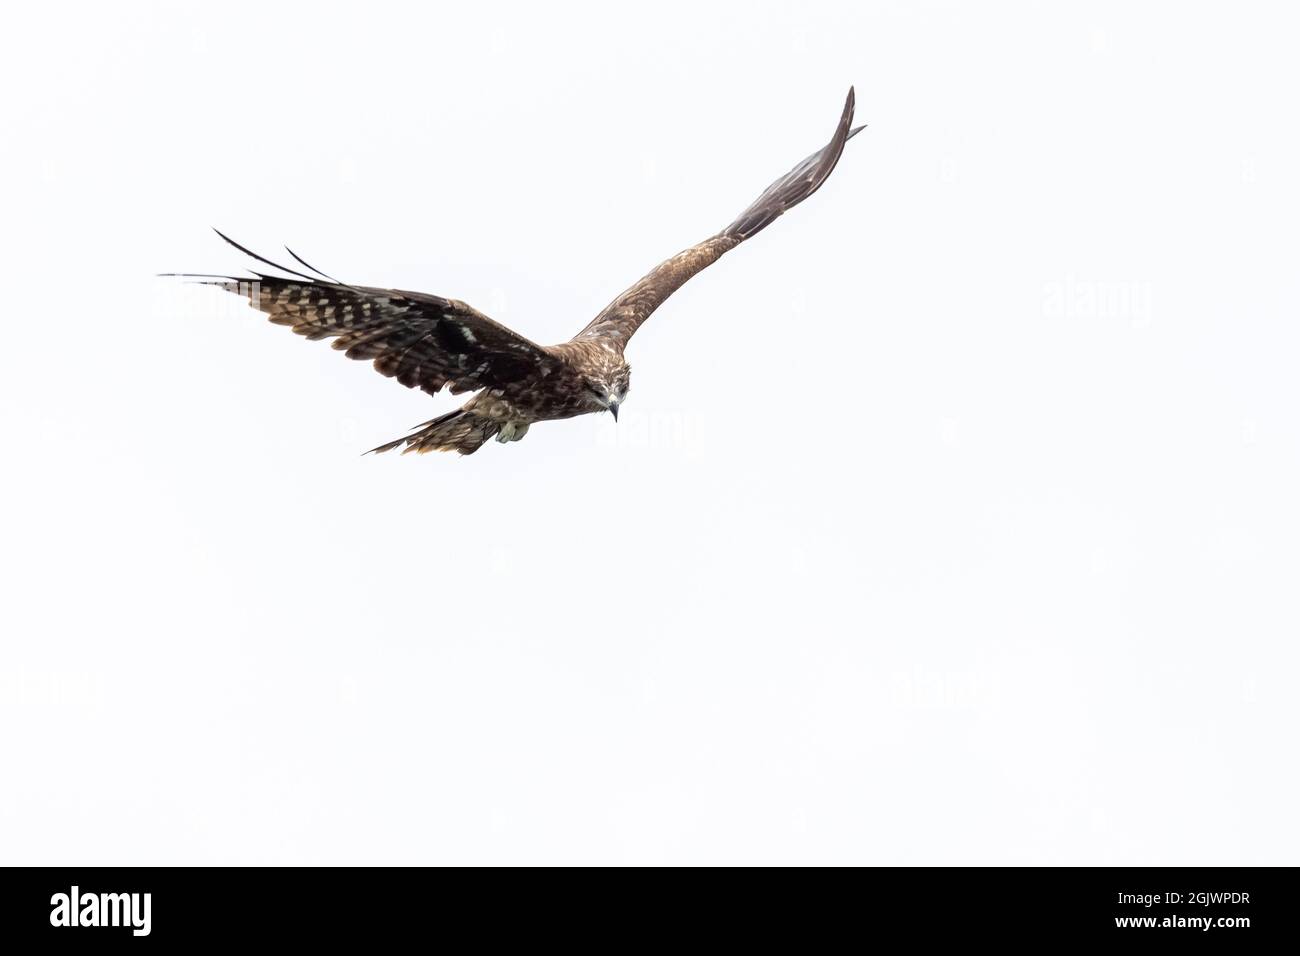 Black Kite flying in sky with while background Stock Photo